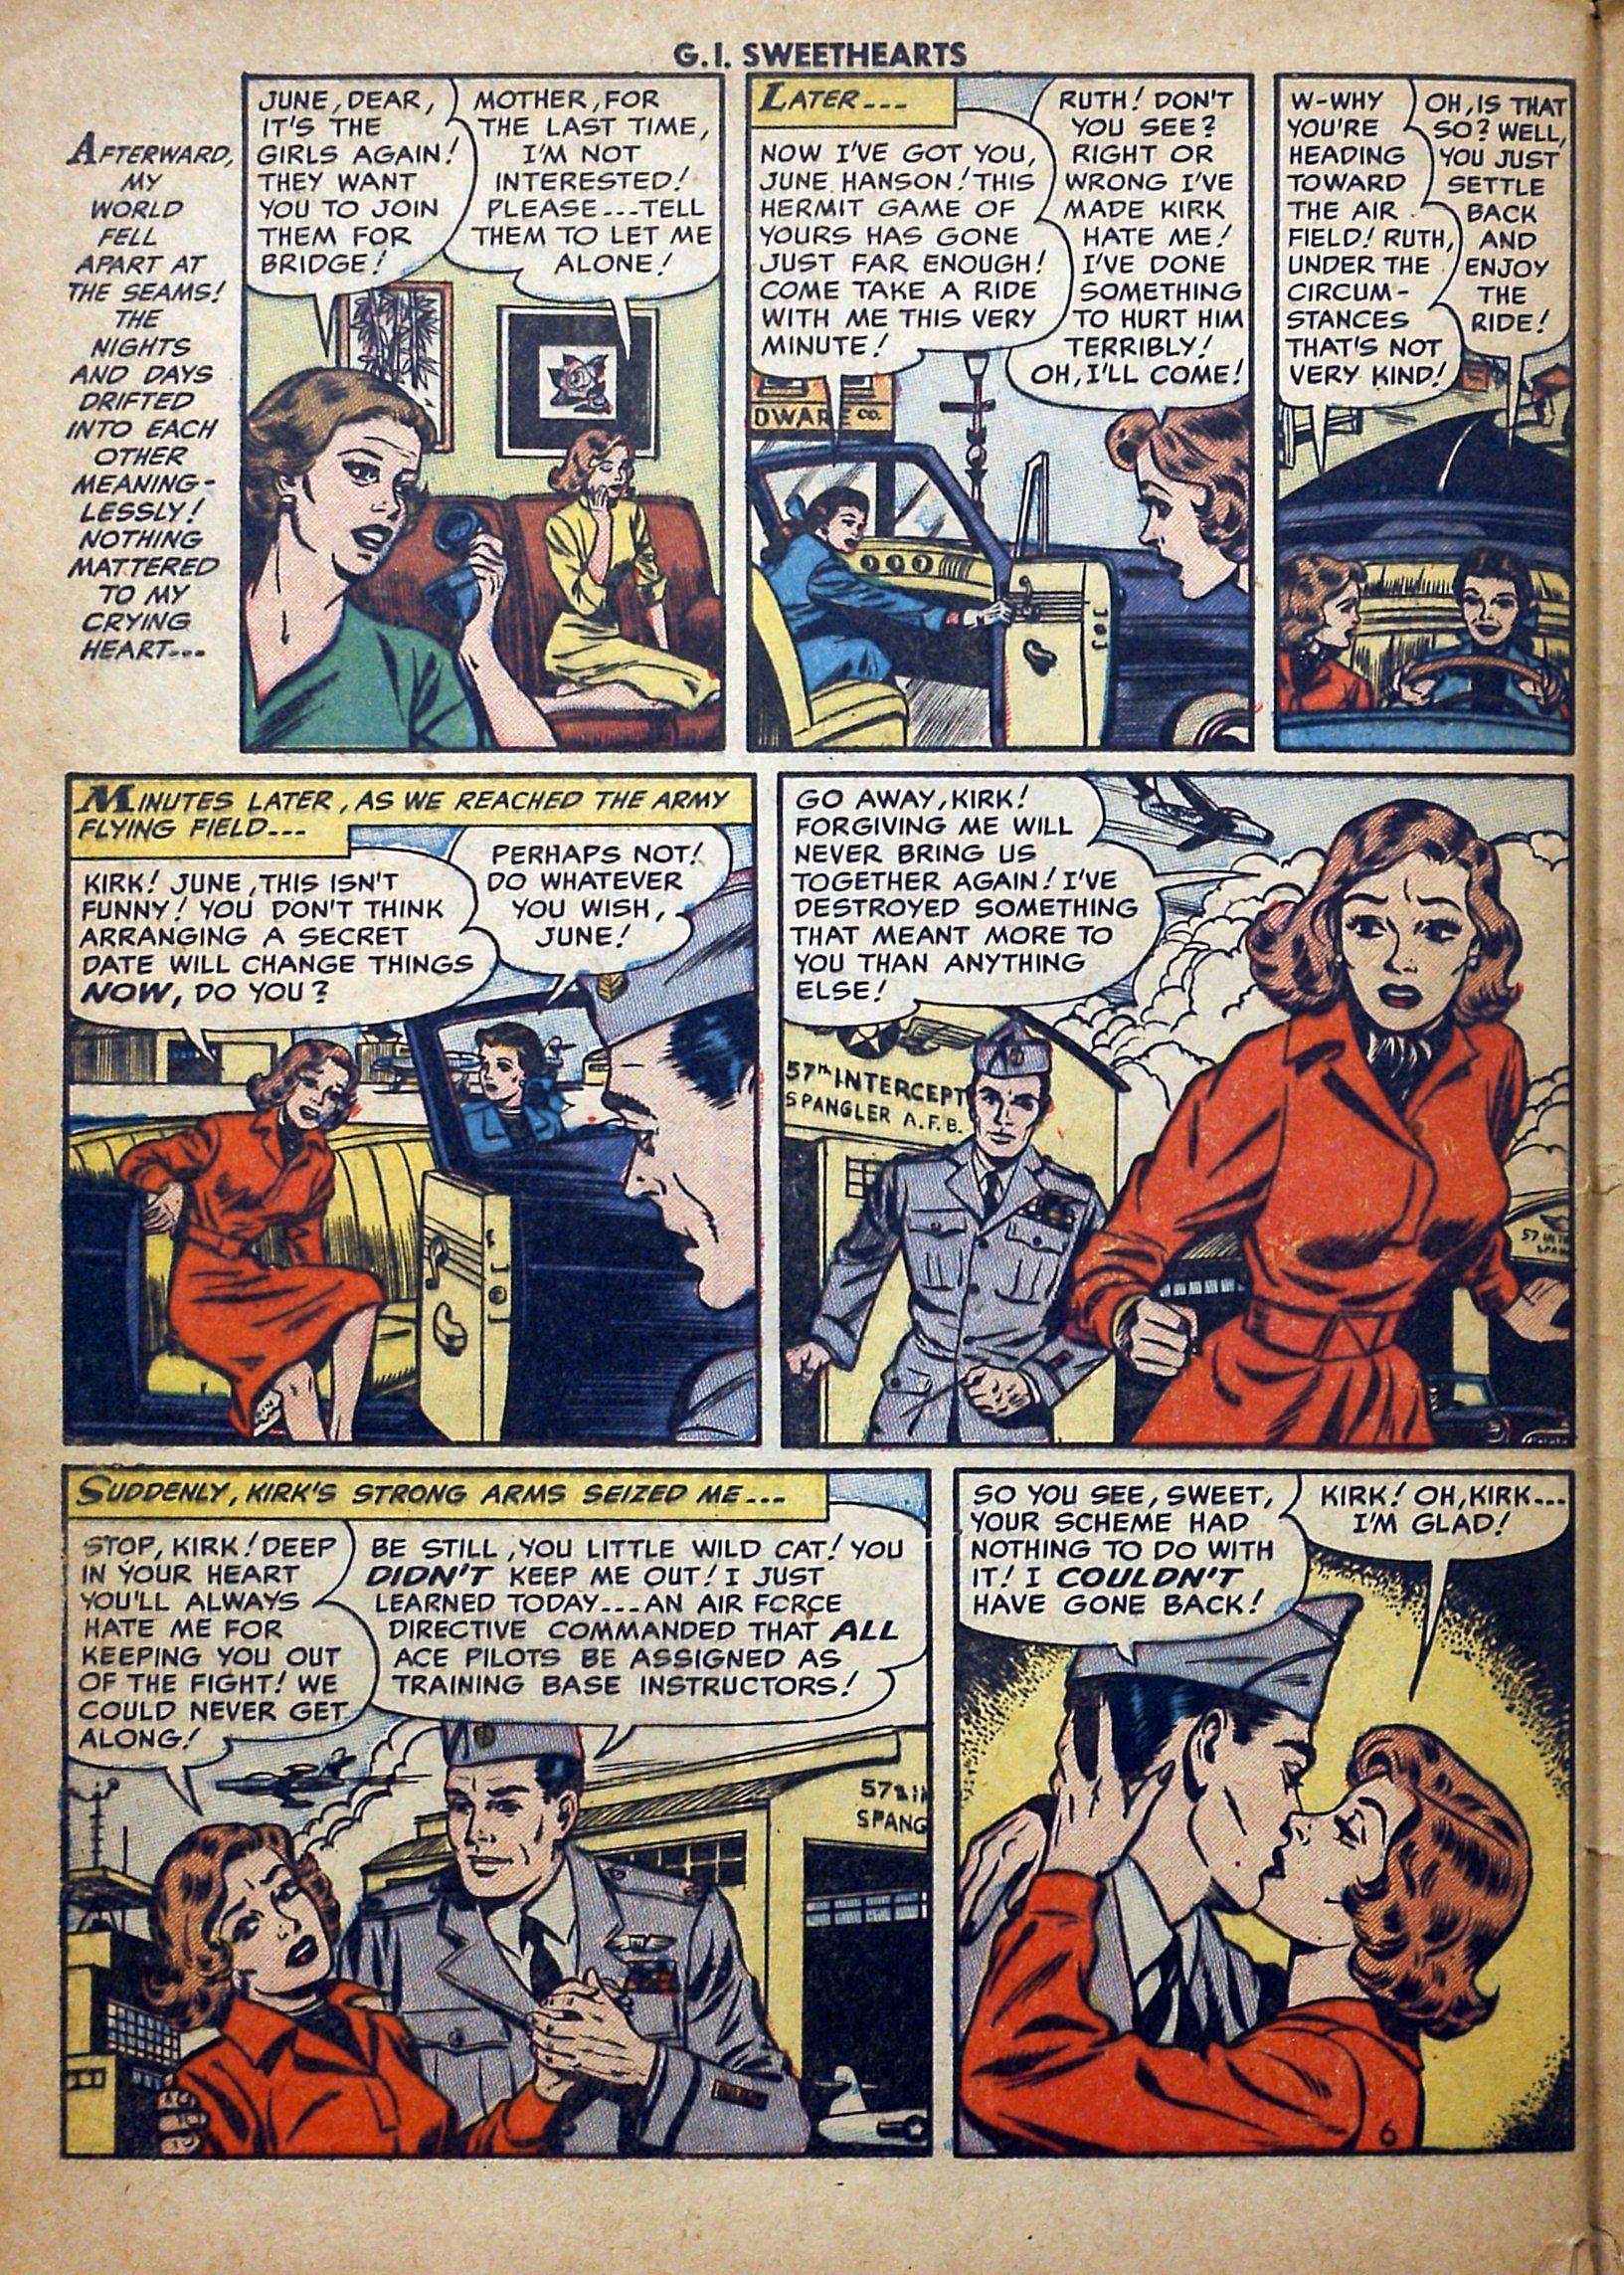 Read online G.I. Sweethearts comic -  Issue #39 - 32